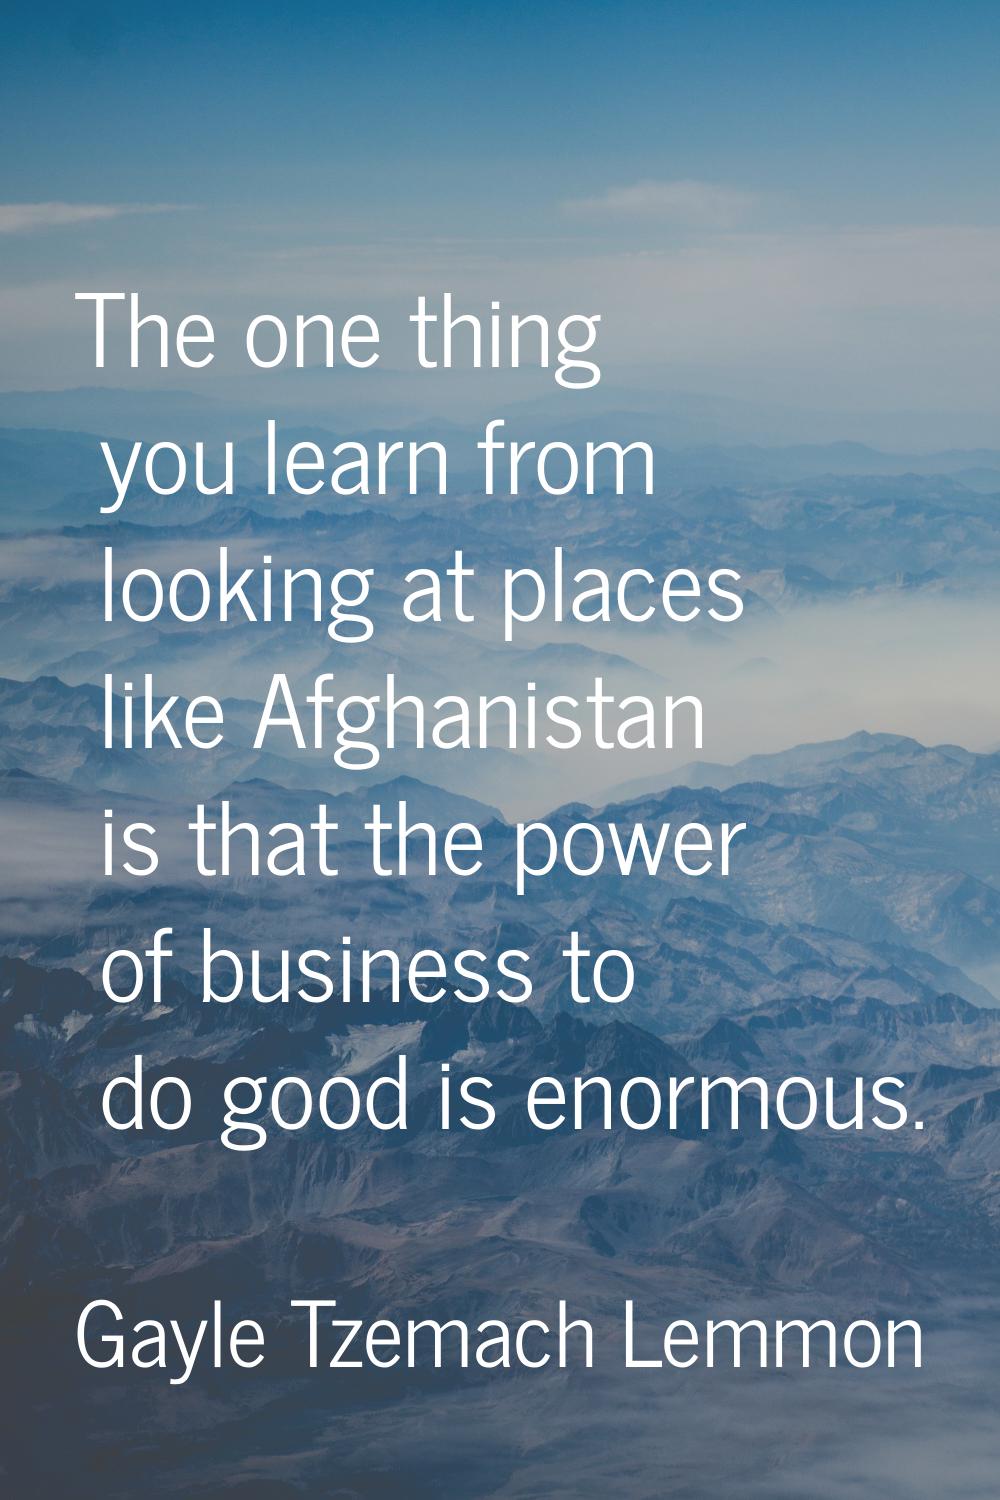 The one thing you learn from looking at places like Afghanistan is that the power of business to do